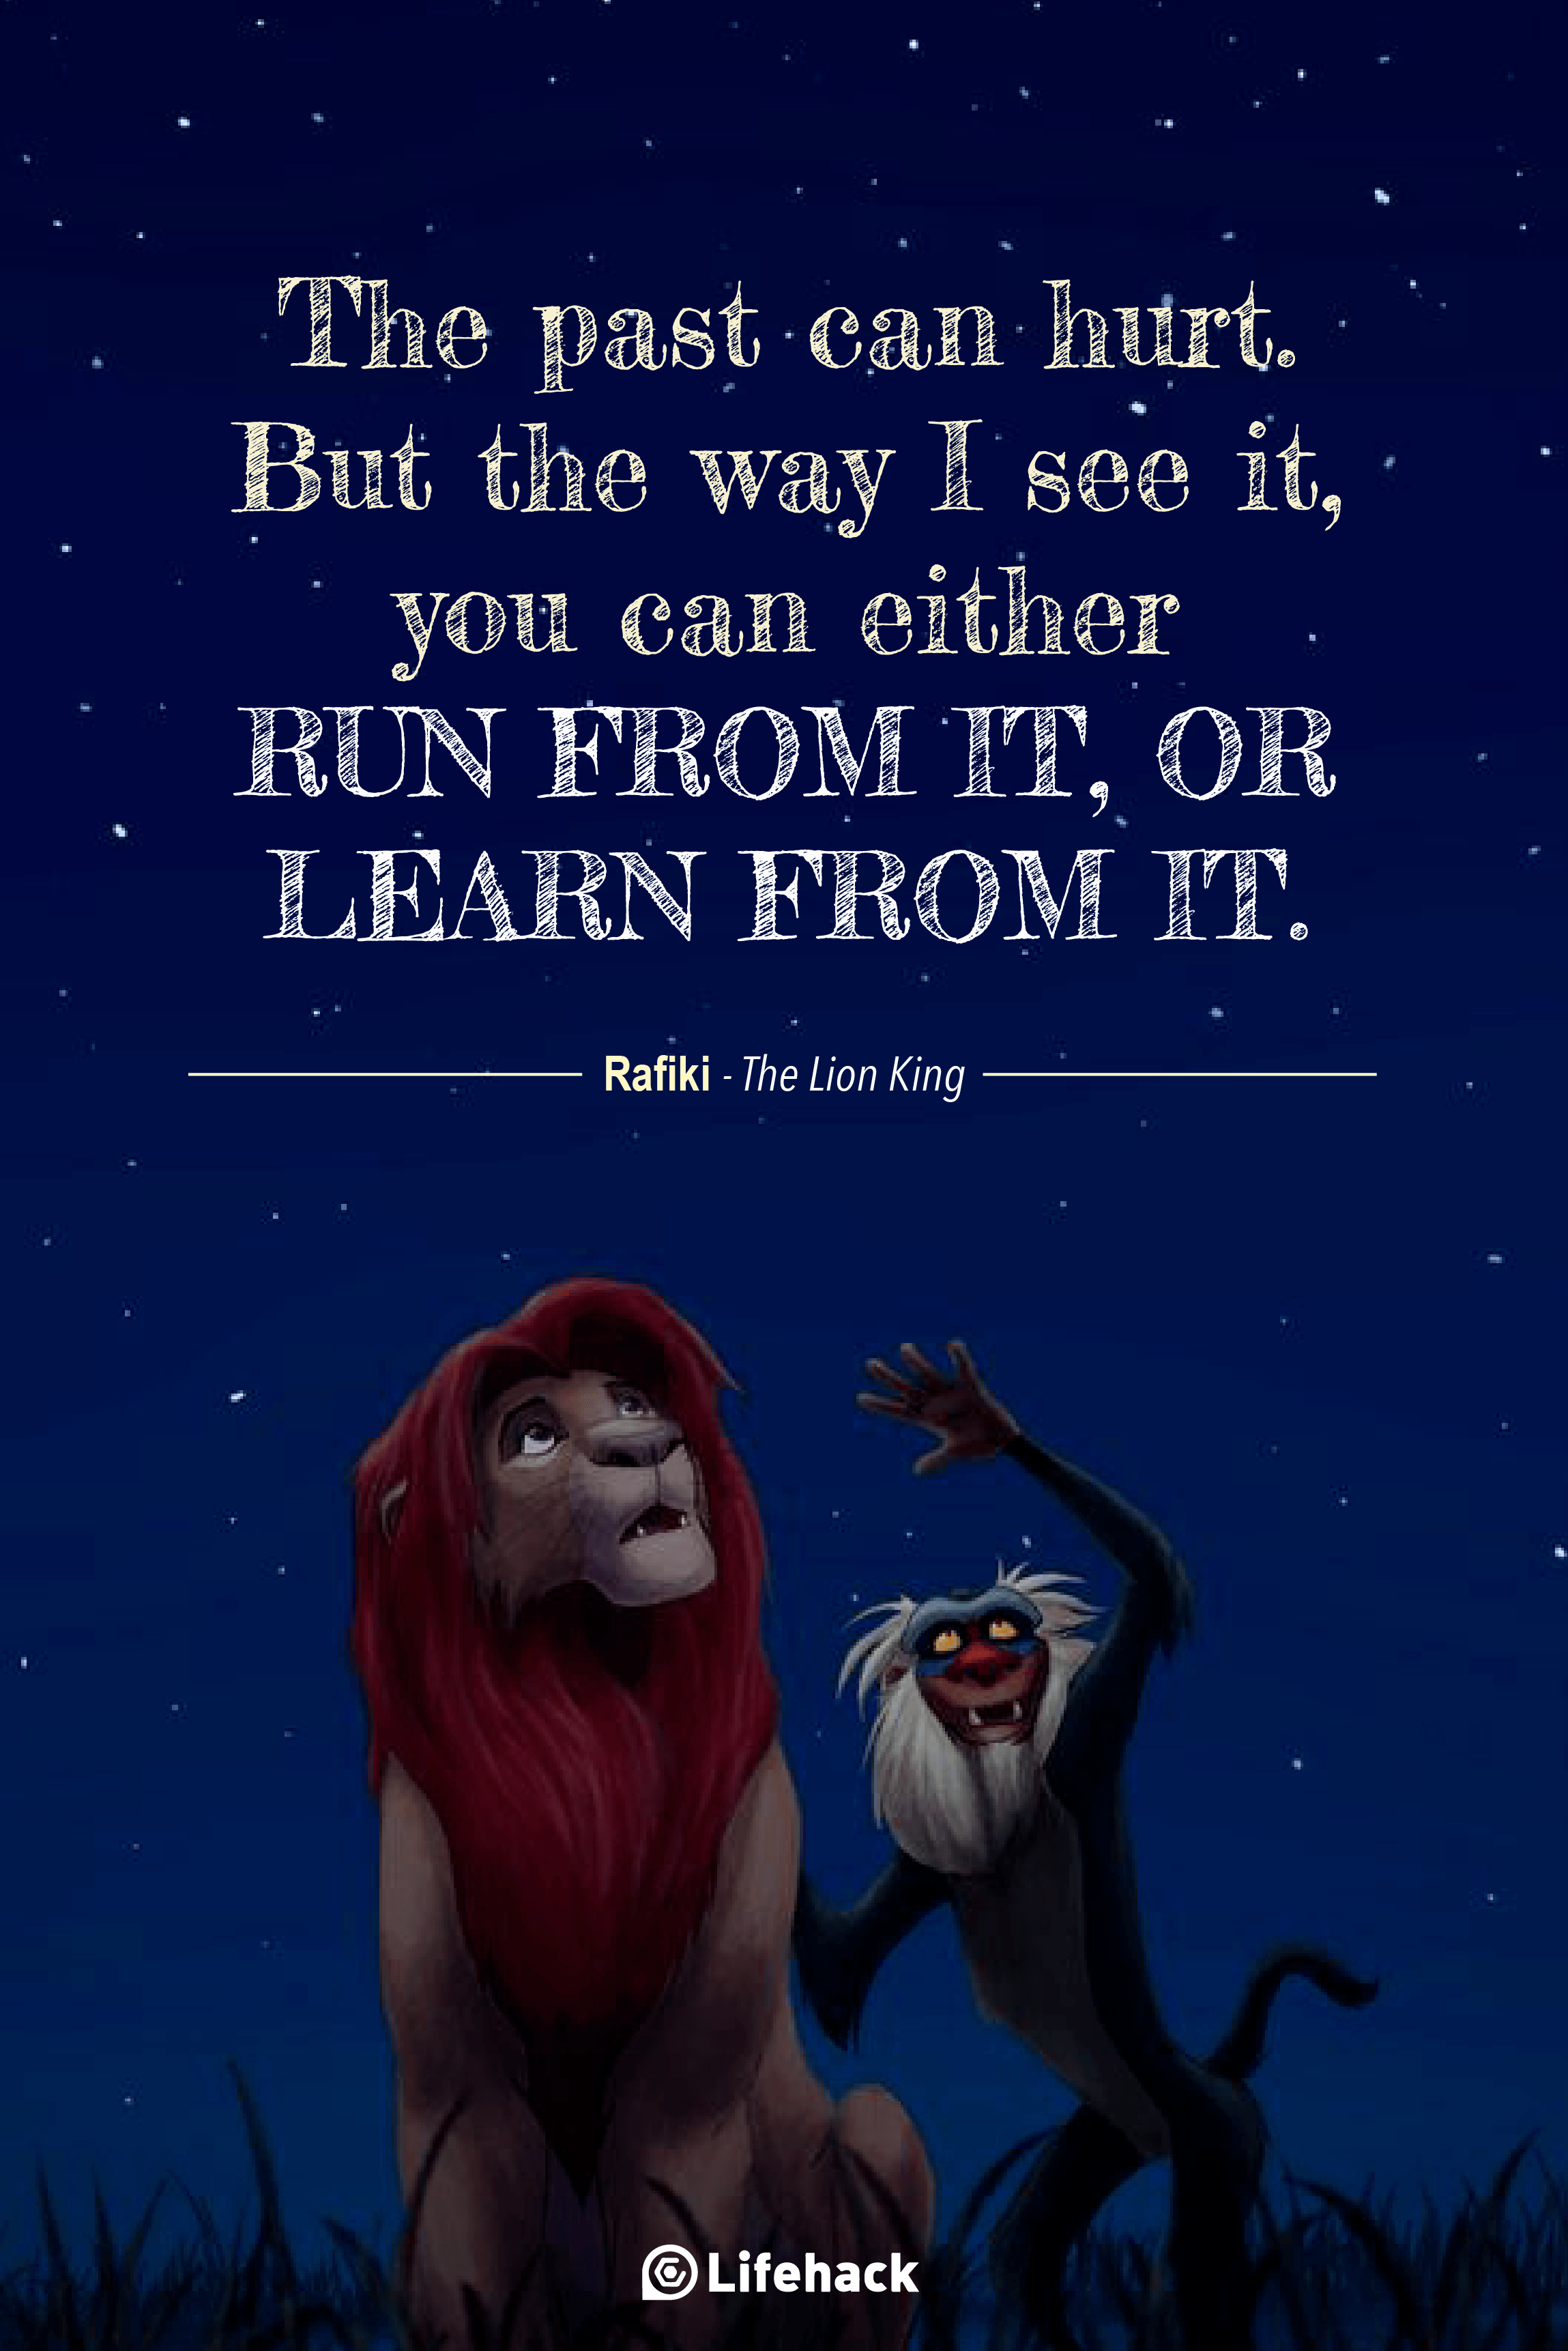 Movie Quotes About Love Disney